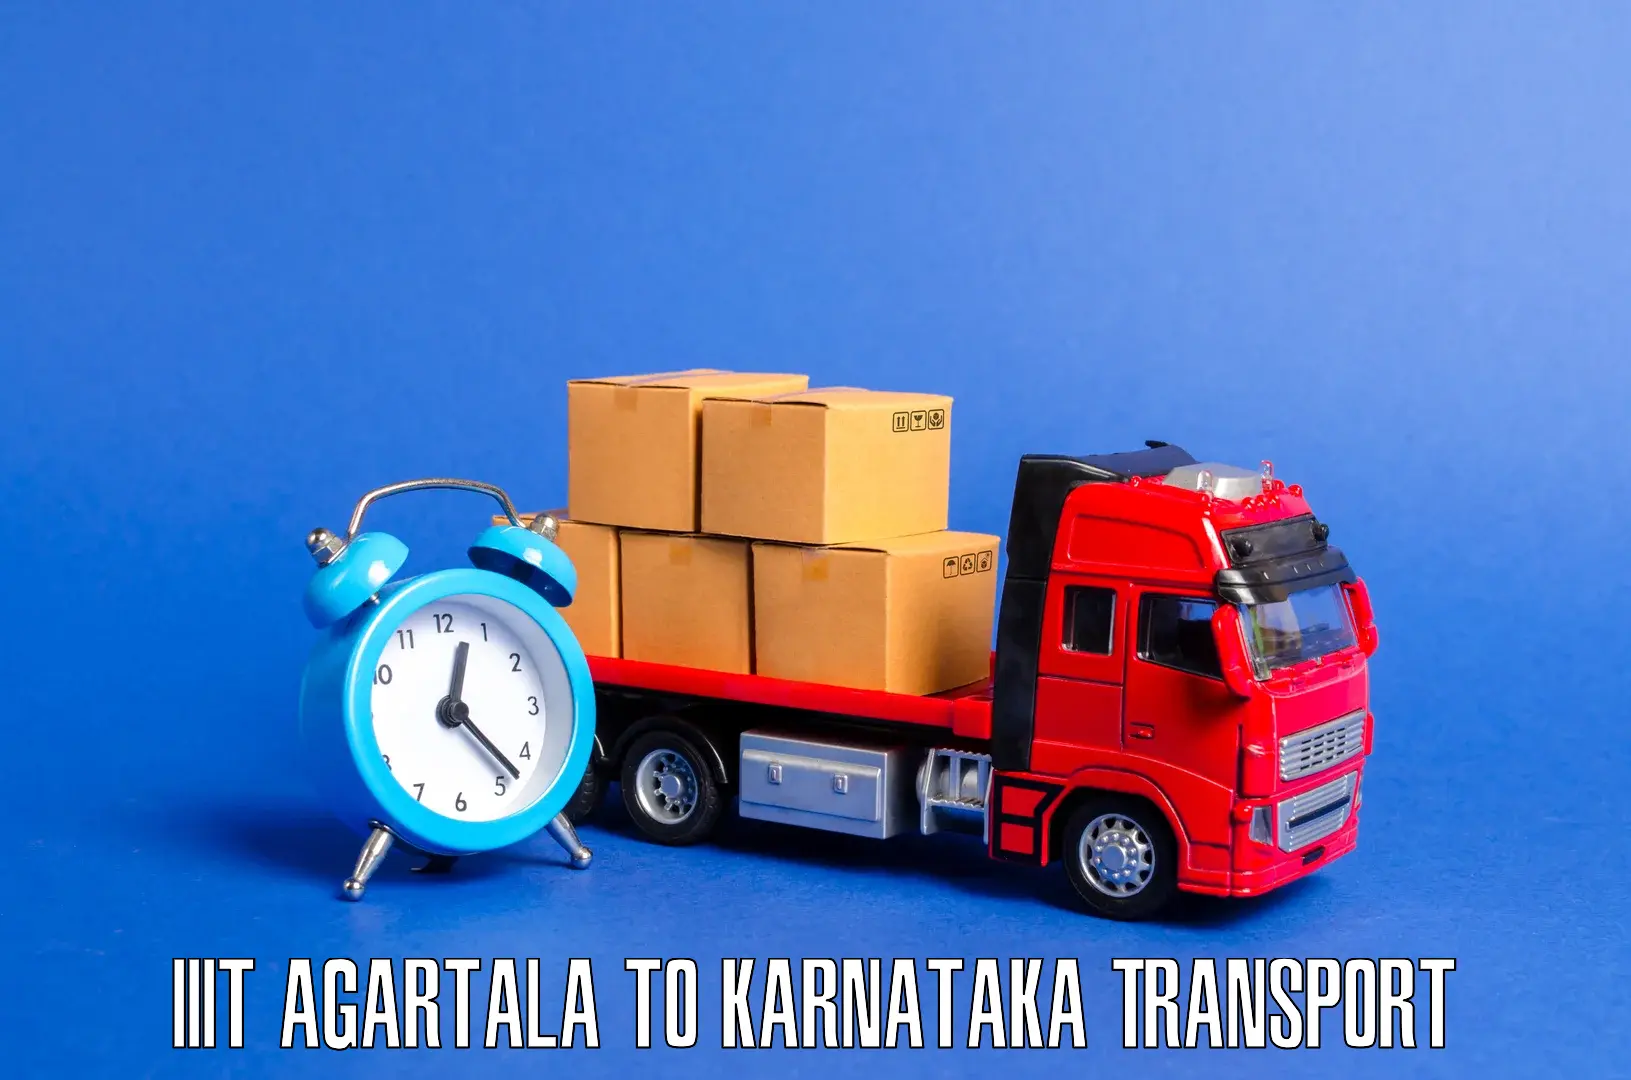 Container transportation services IIIT Agartala to Humnabad